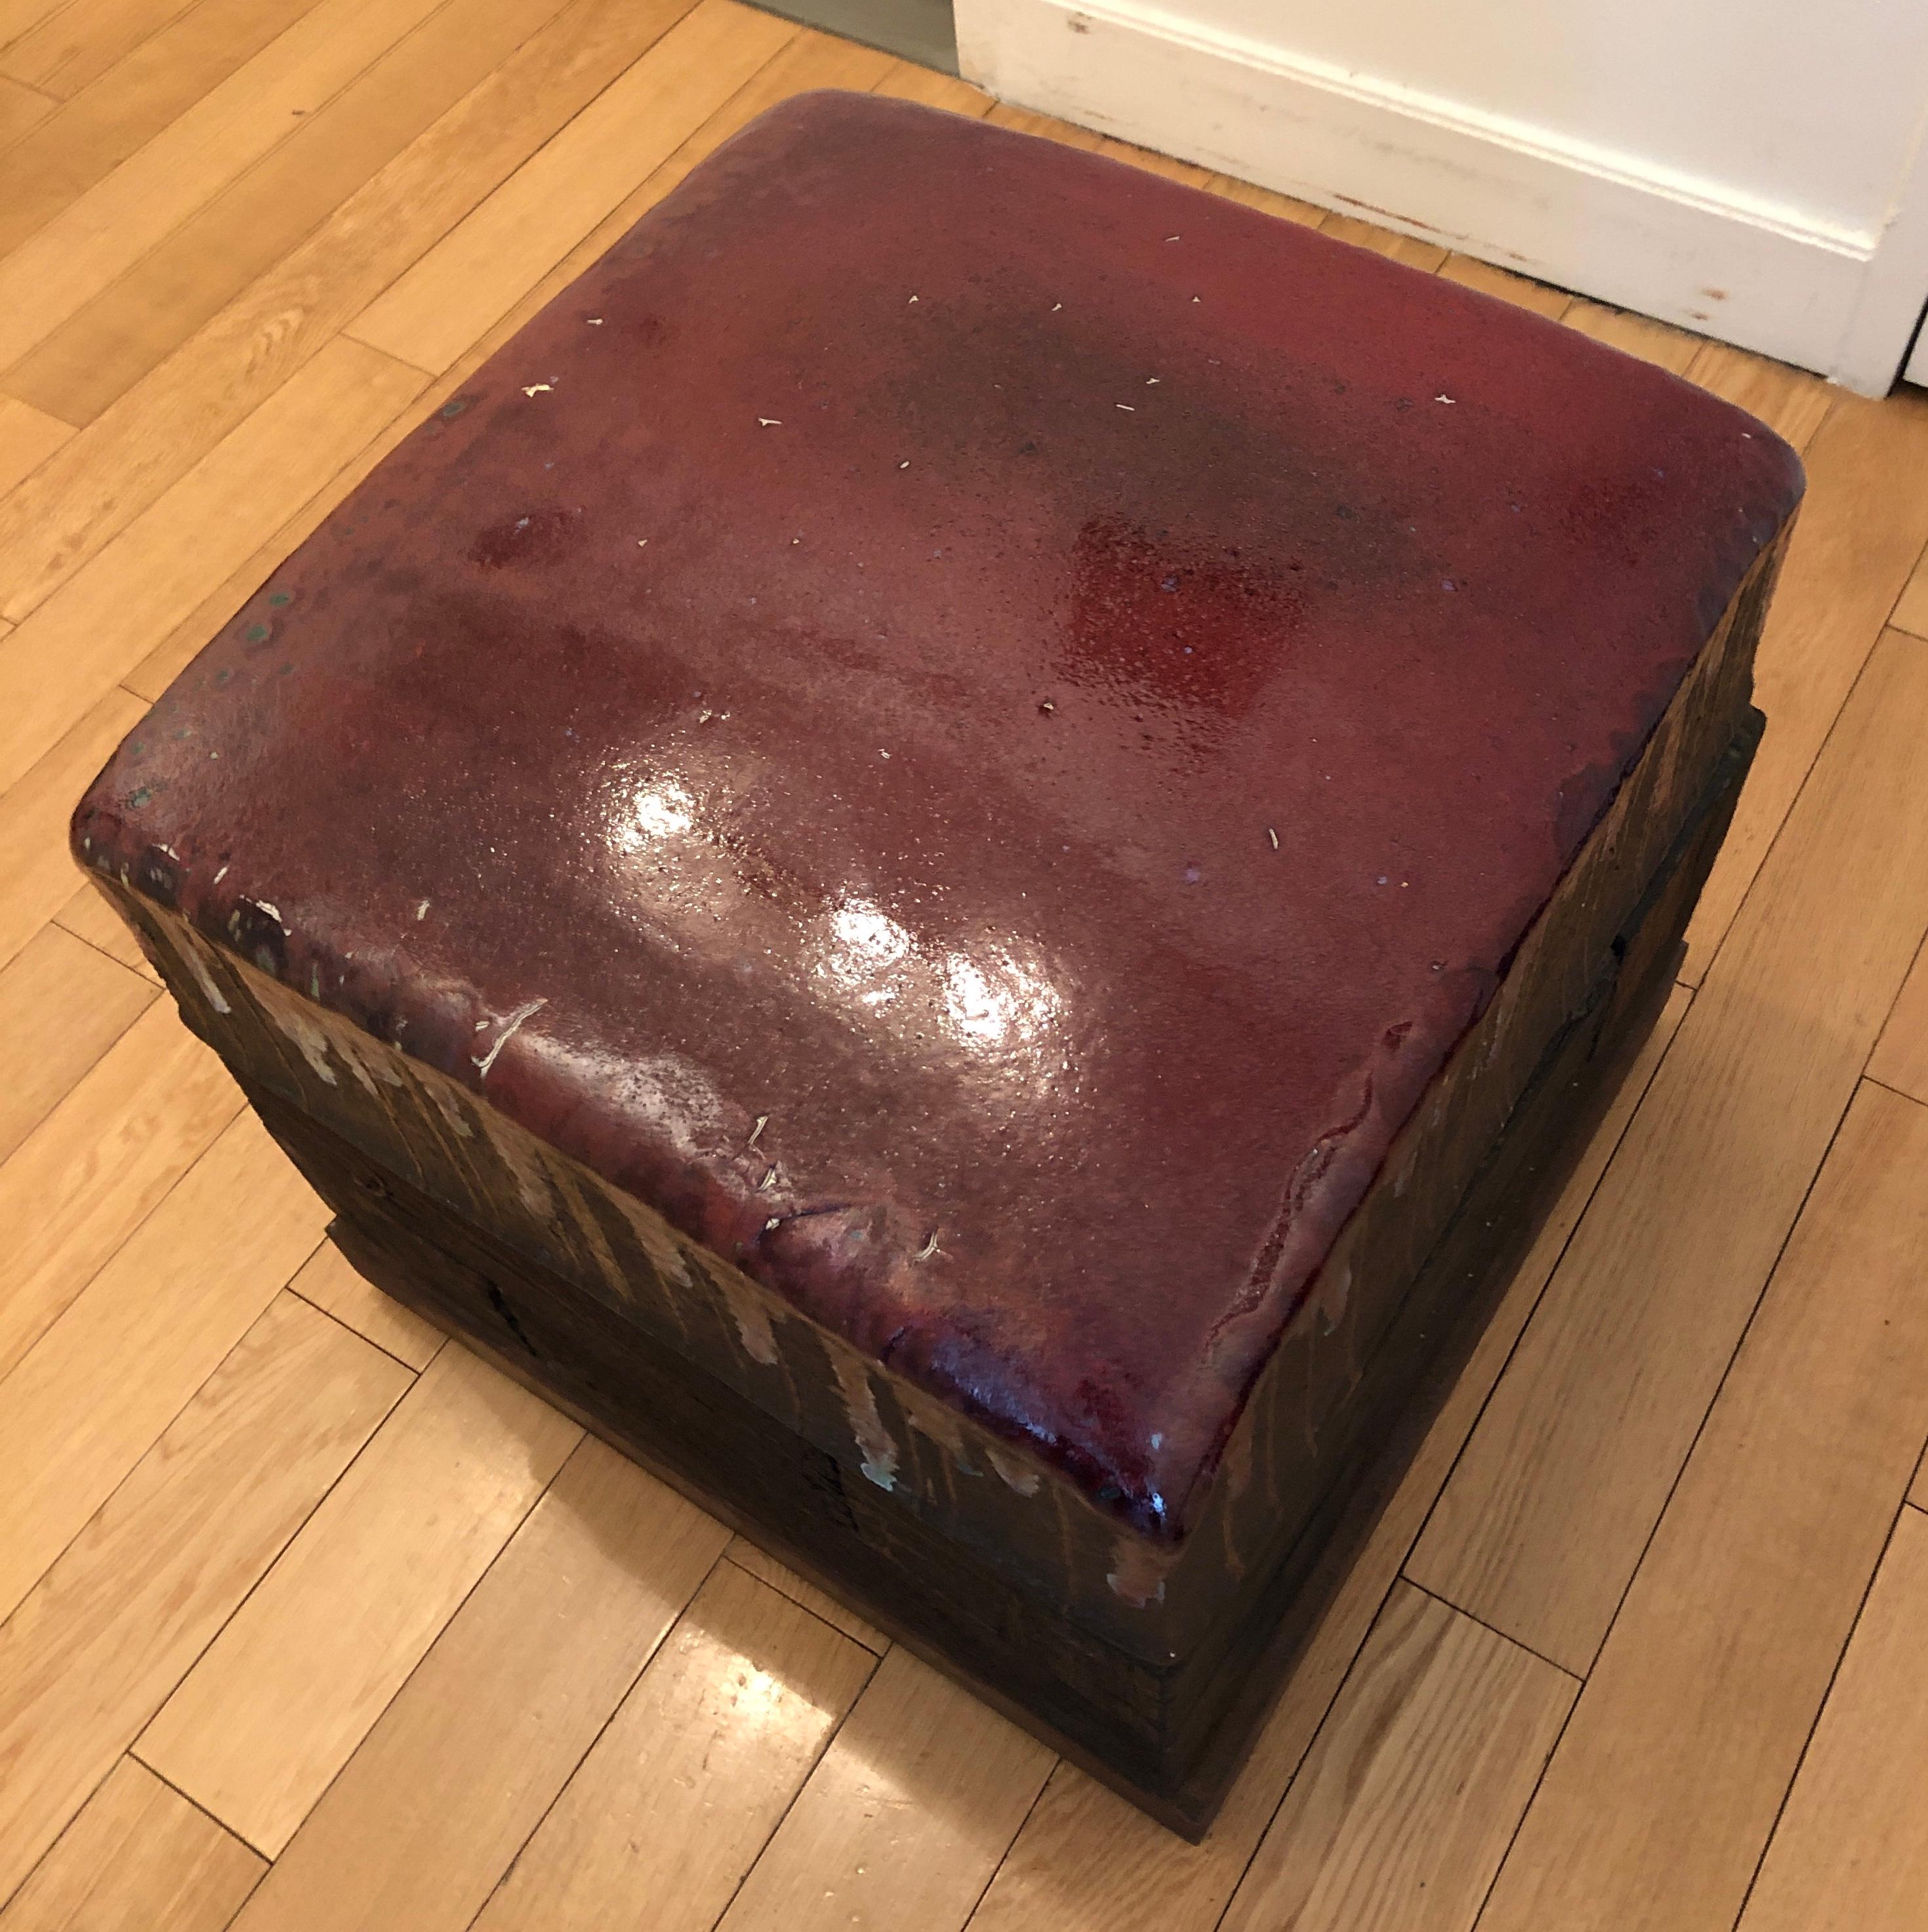 Created by noted Japanese artist Tetsuya Yamada in 1998 this sculptural box/seat features fascinating combination of materials including antique wood, ceramic, various glazes, metal and wheels.